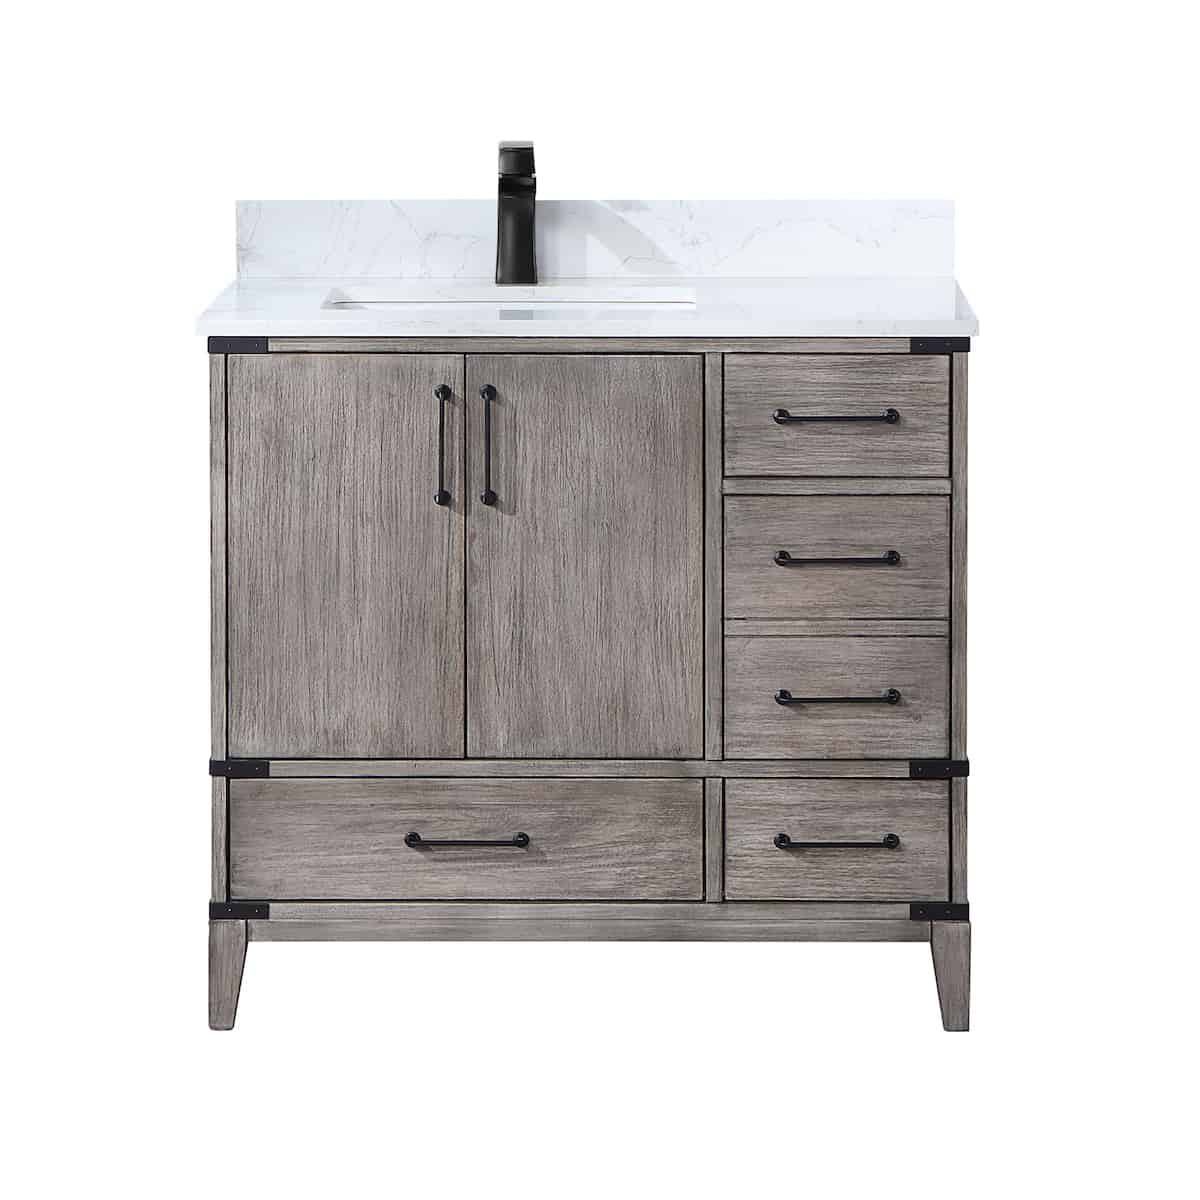 Vinnova Zaragoza 36 Inch Freestanding Single Sink Bath Vanity in Classical Grey with White Composite Grain Stone Countertop Without Mirror With Faucet 799036-CR-GW-NM